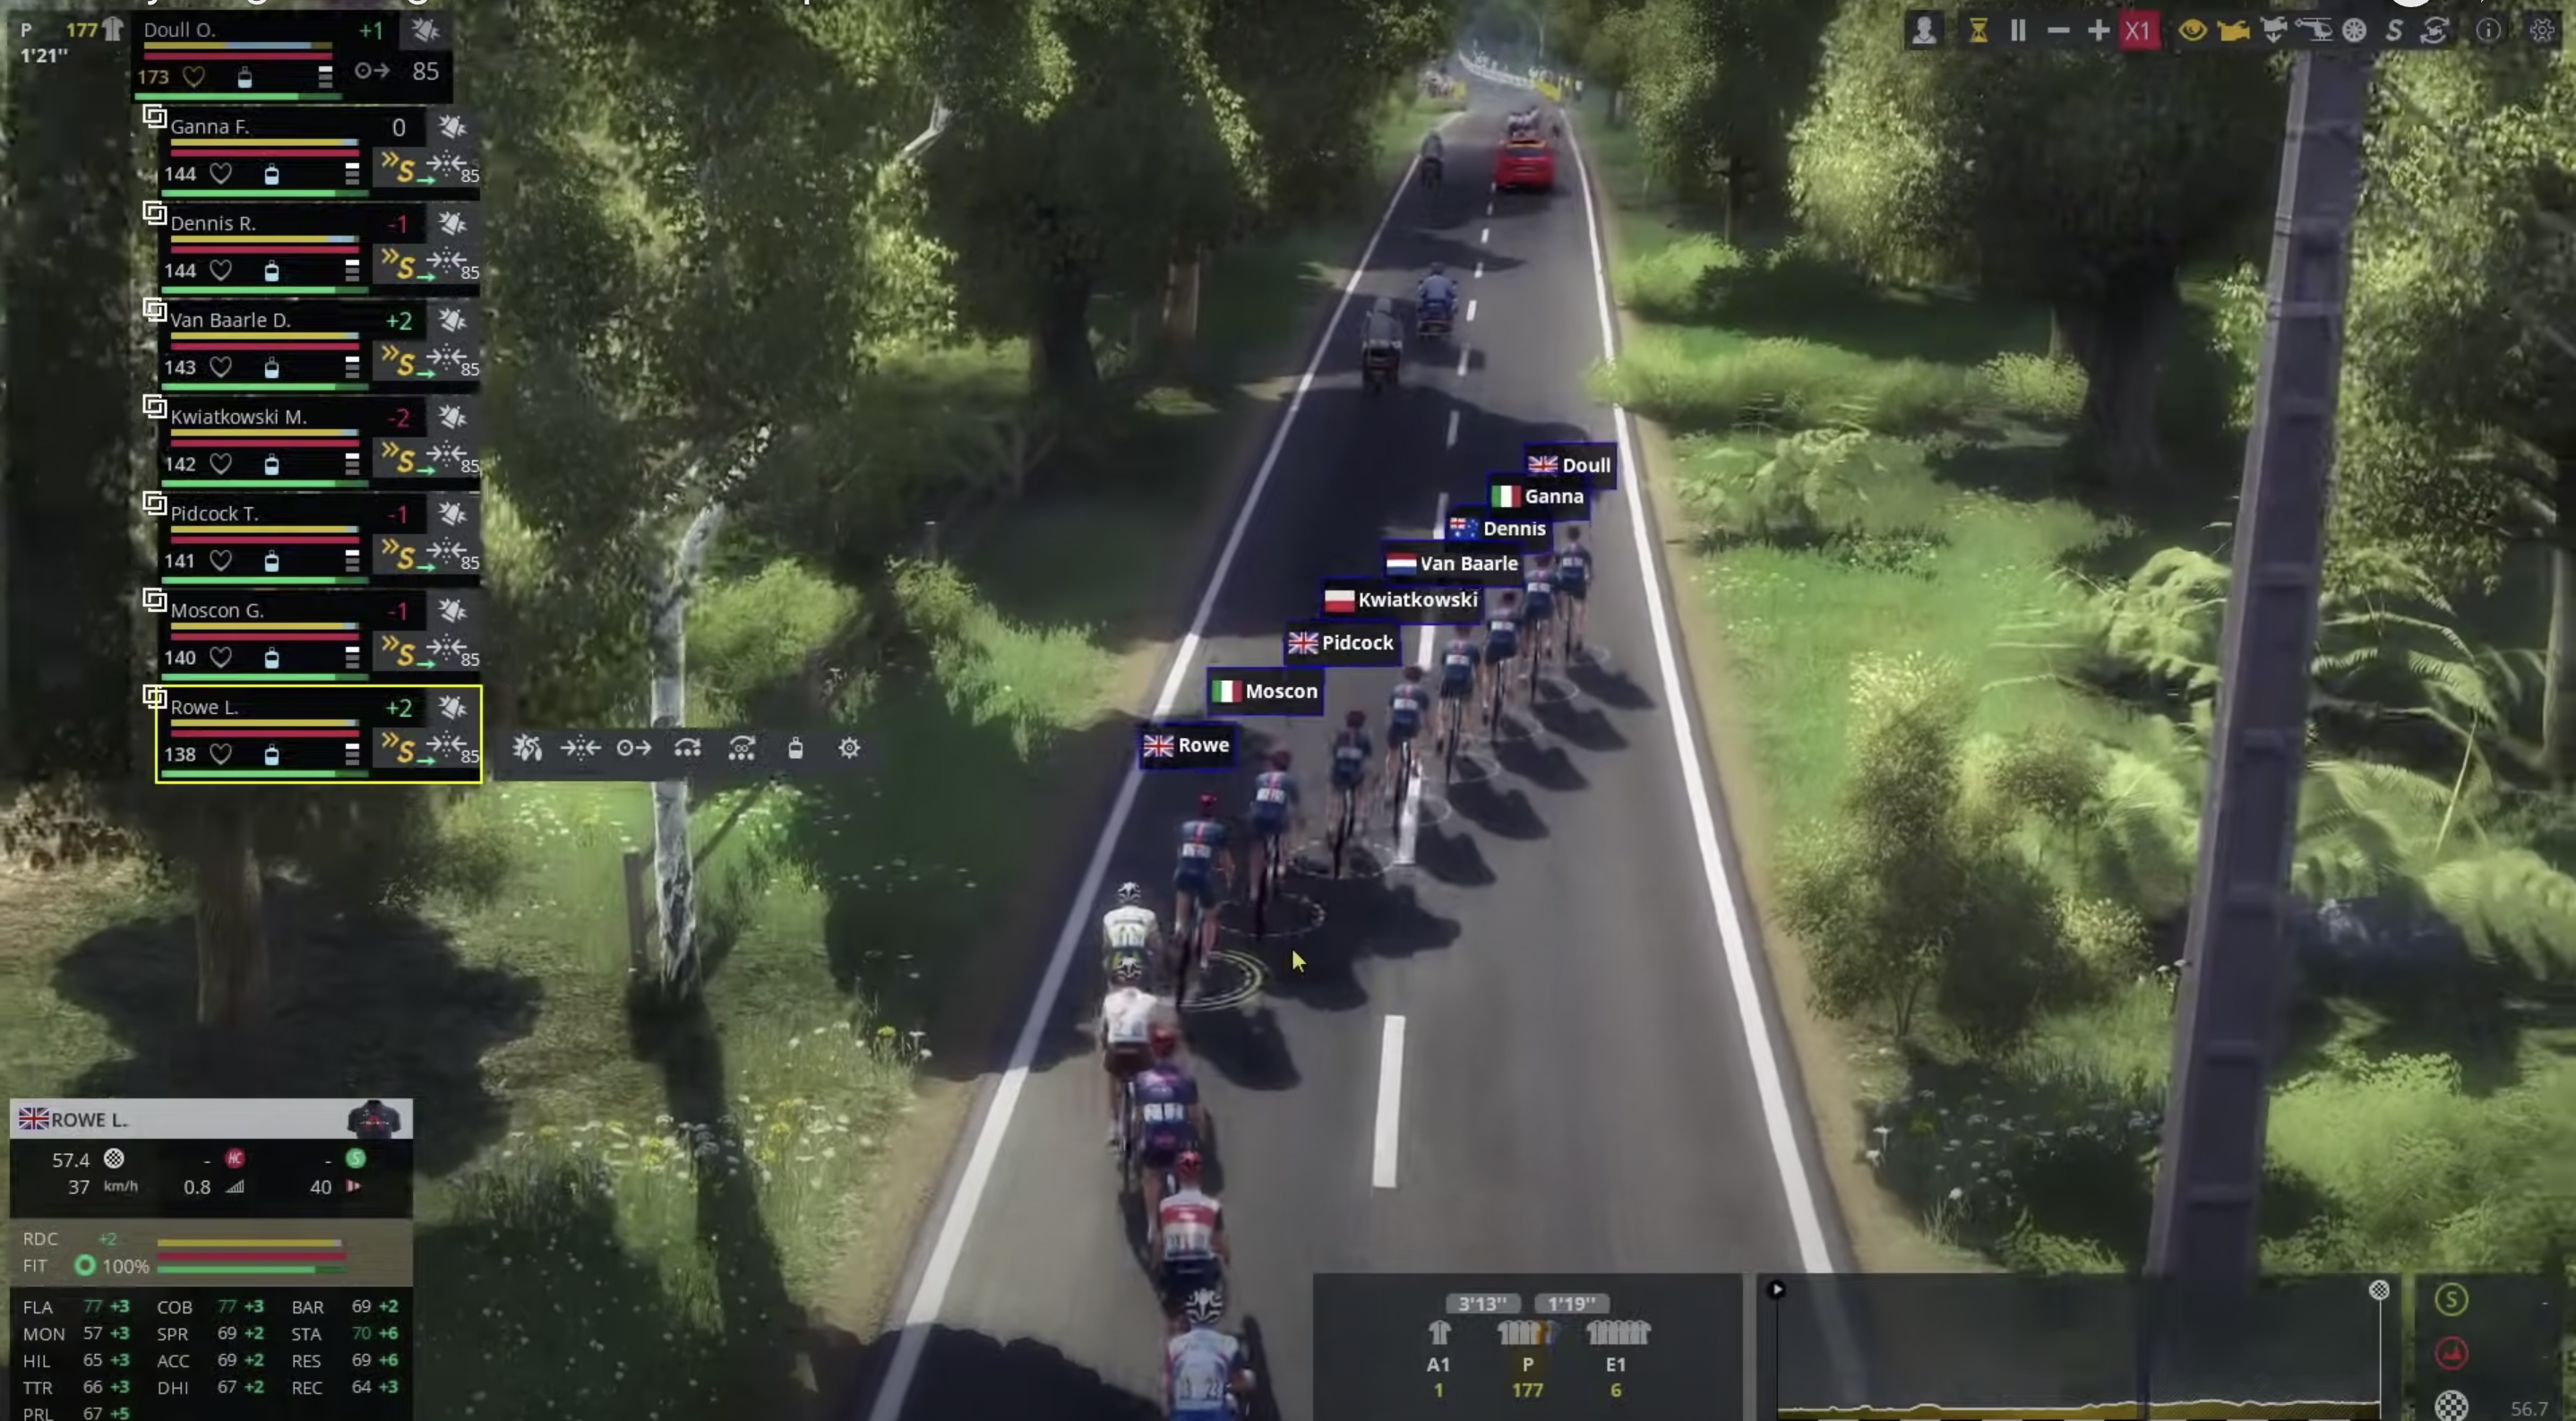 Pro Cycling Manager 2017 Review - Just A Hint - Thumb Culture